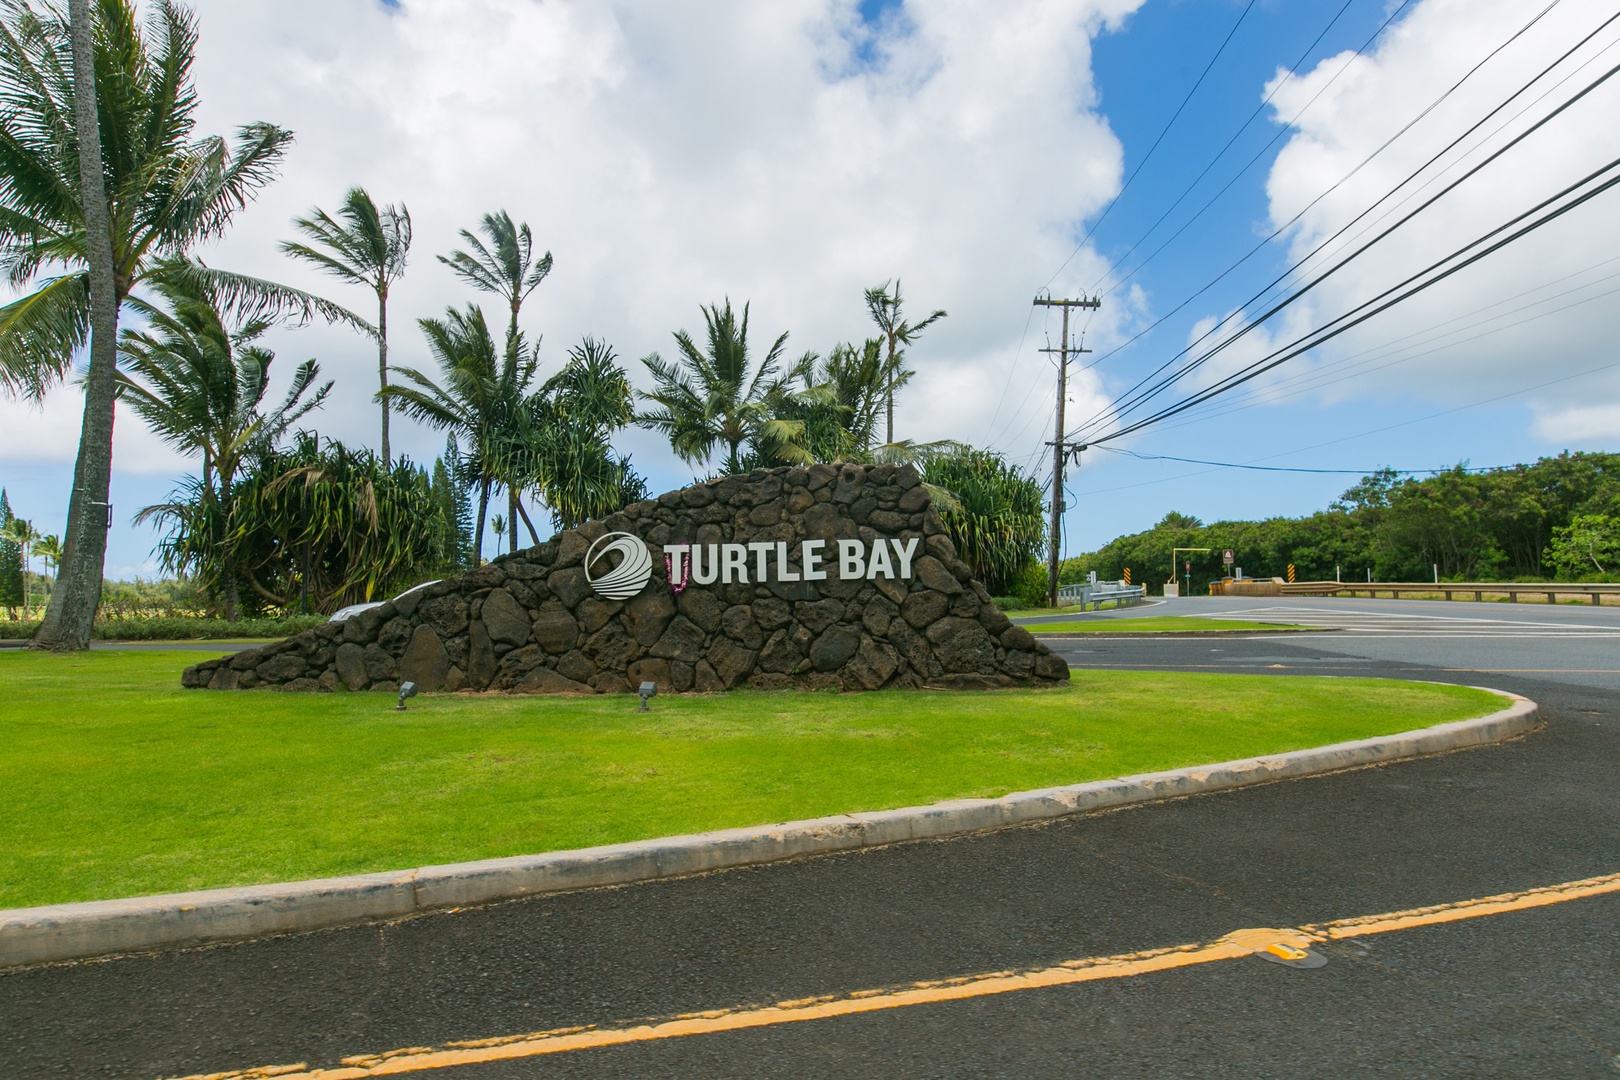 Kahuku Vacation Rentals, Ilima West Kuilima Estates #18 at Turtle Bay - Welcome to Turtle Bay on the famous North Shore of Oahu!